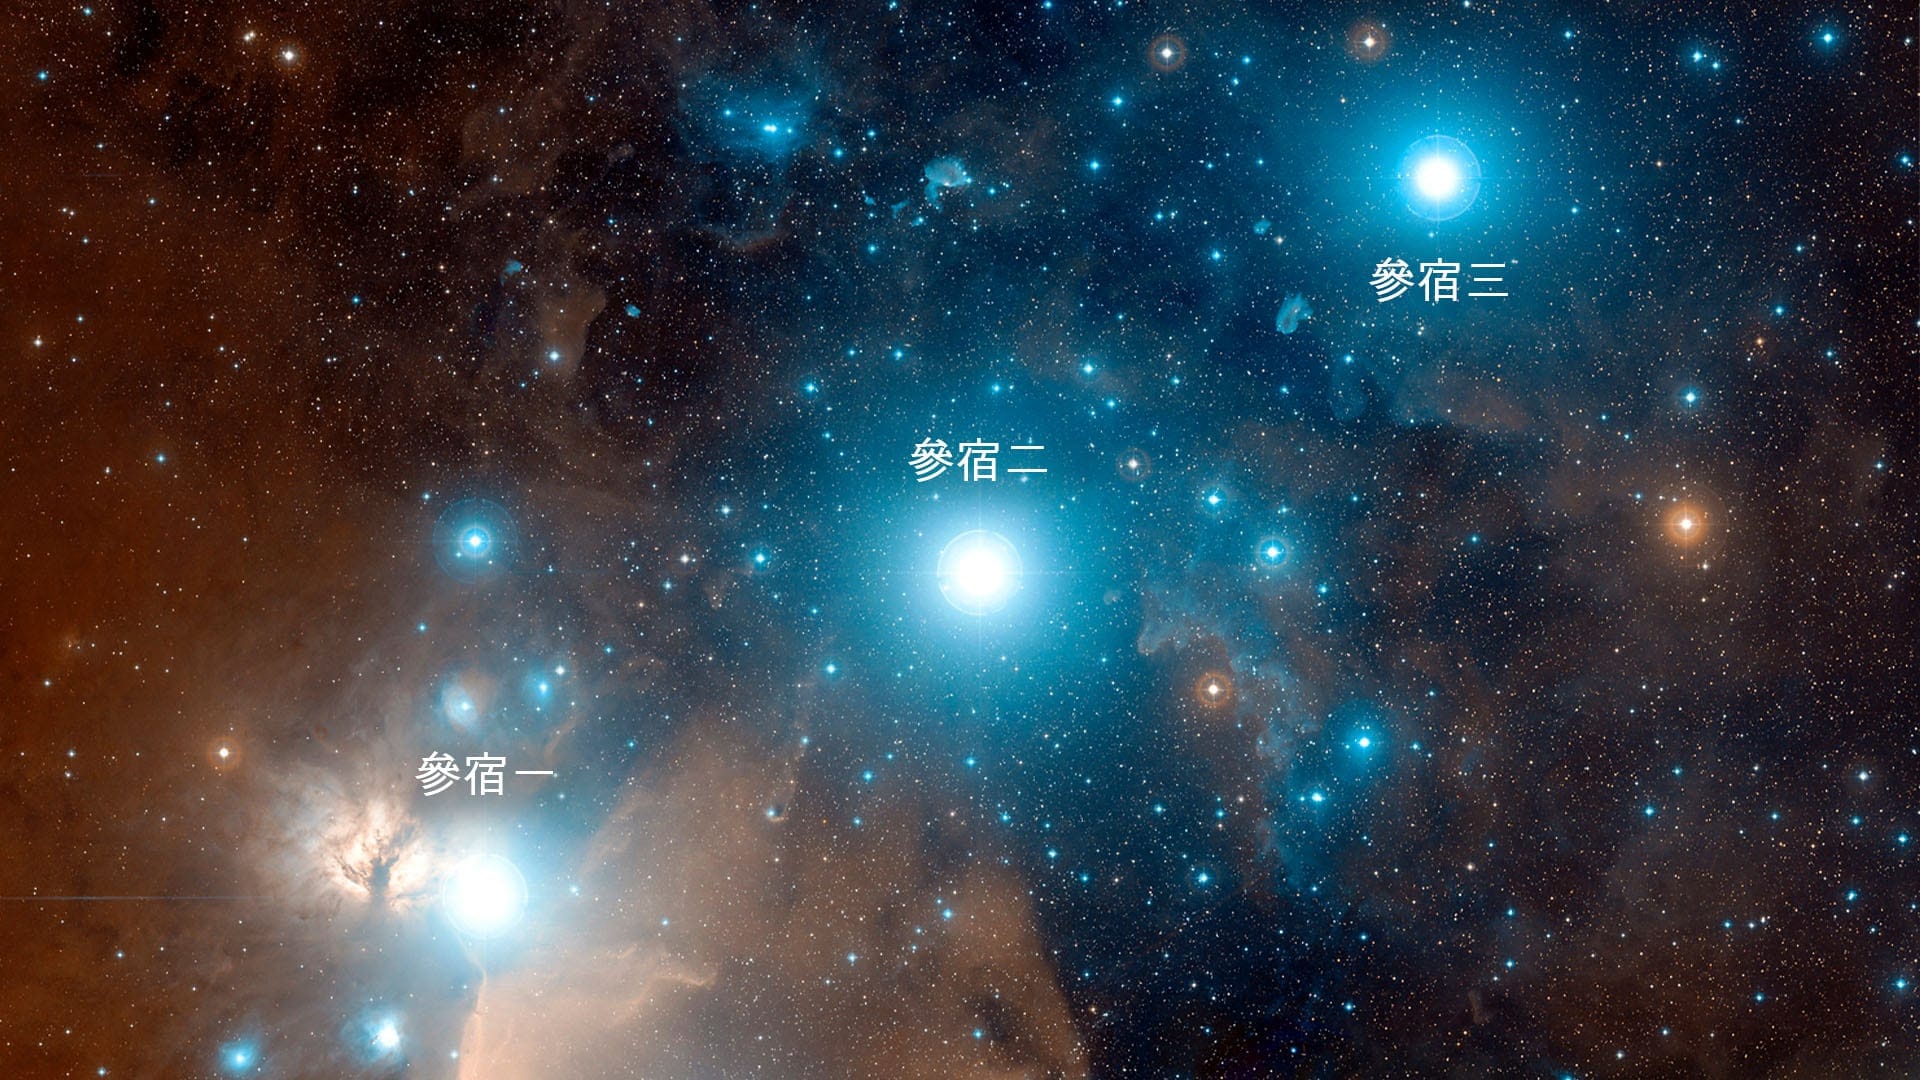 Orion's Belt stars with names